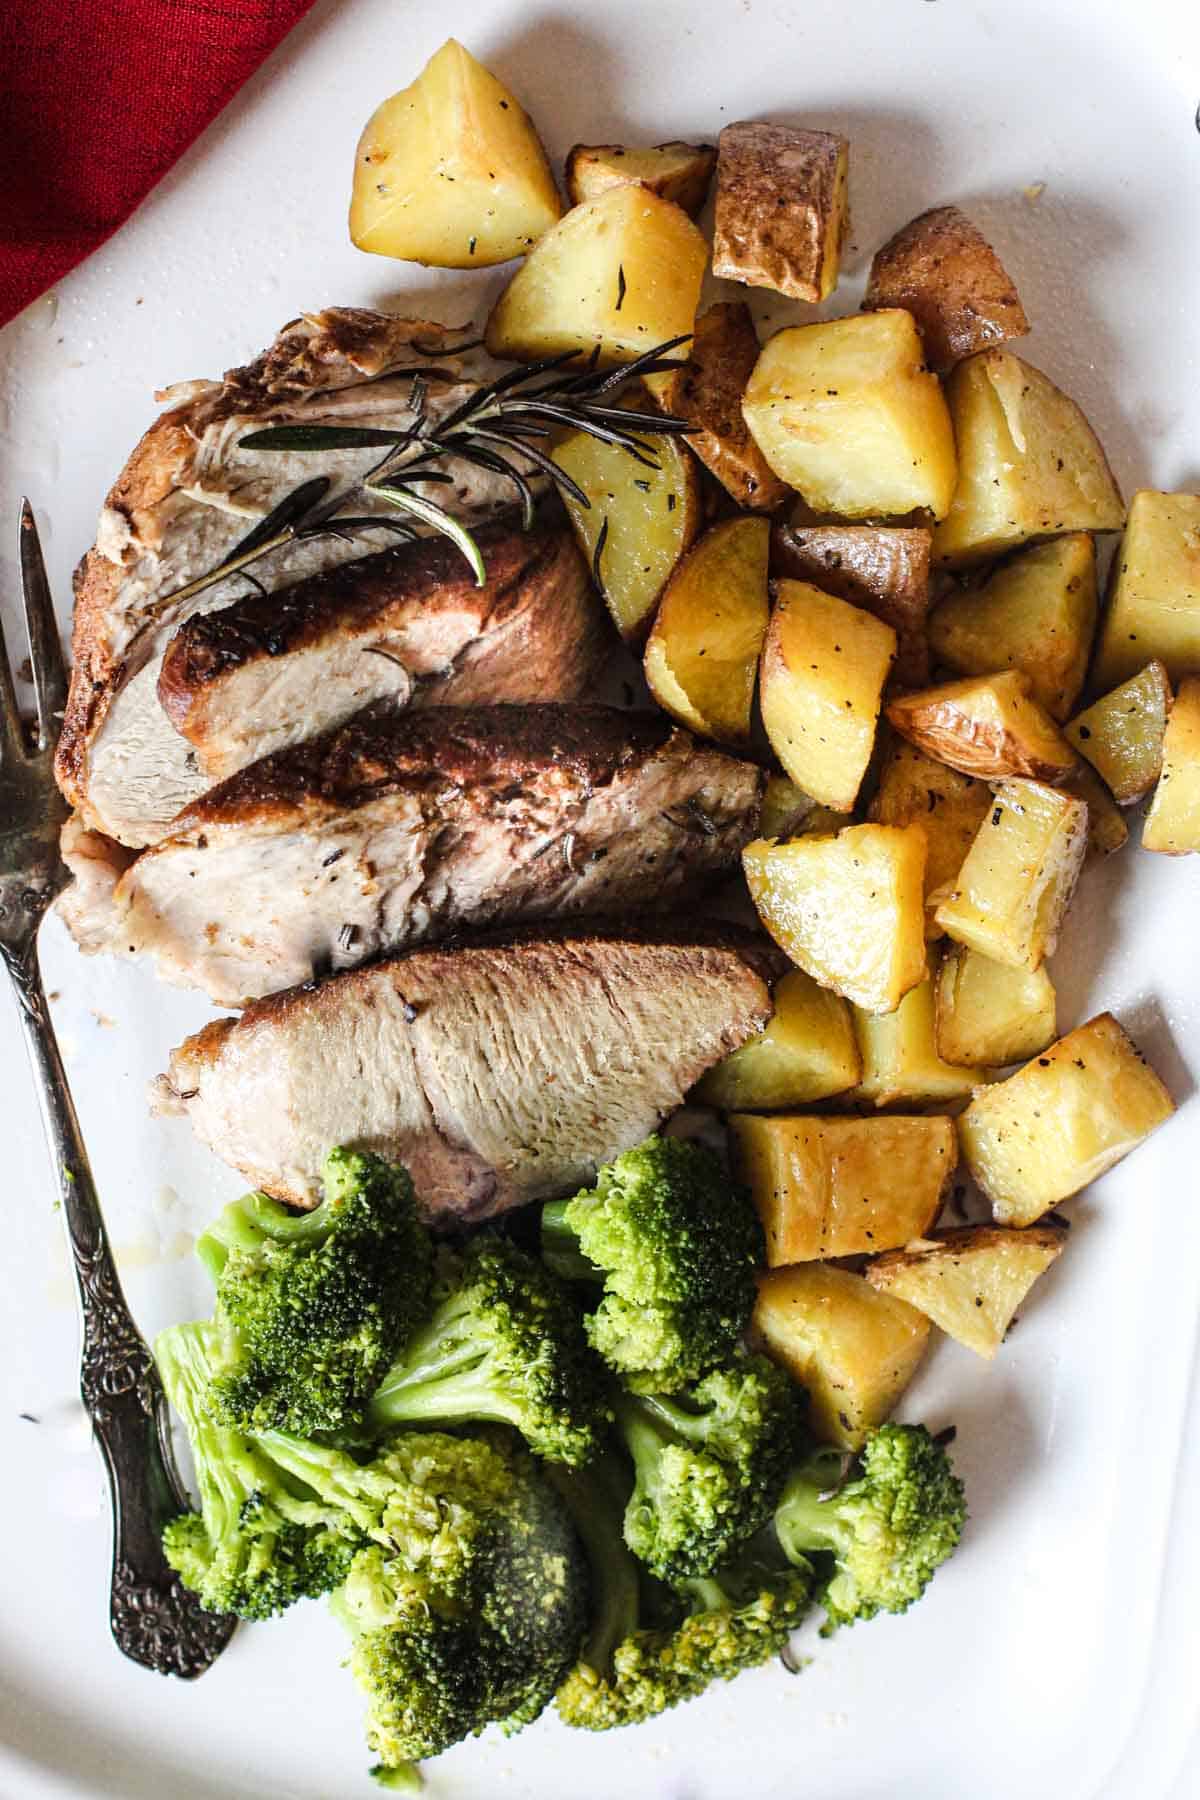 Pork roast thats been cooked in the pressure cooker served with fried potatoes and steamed broccoli